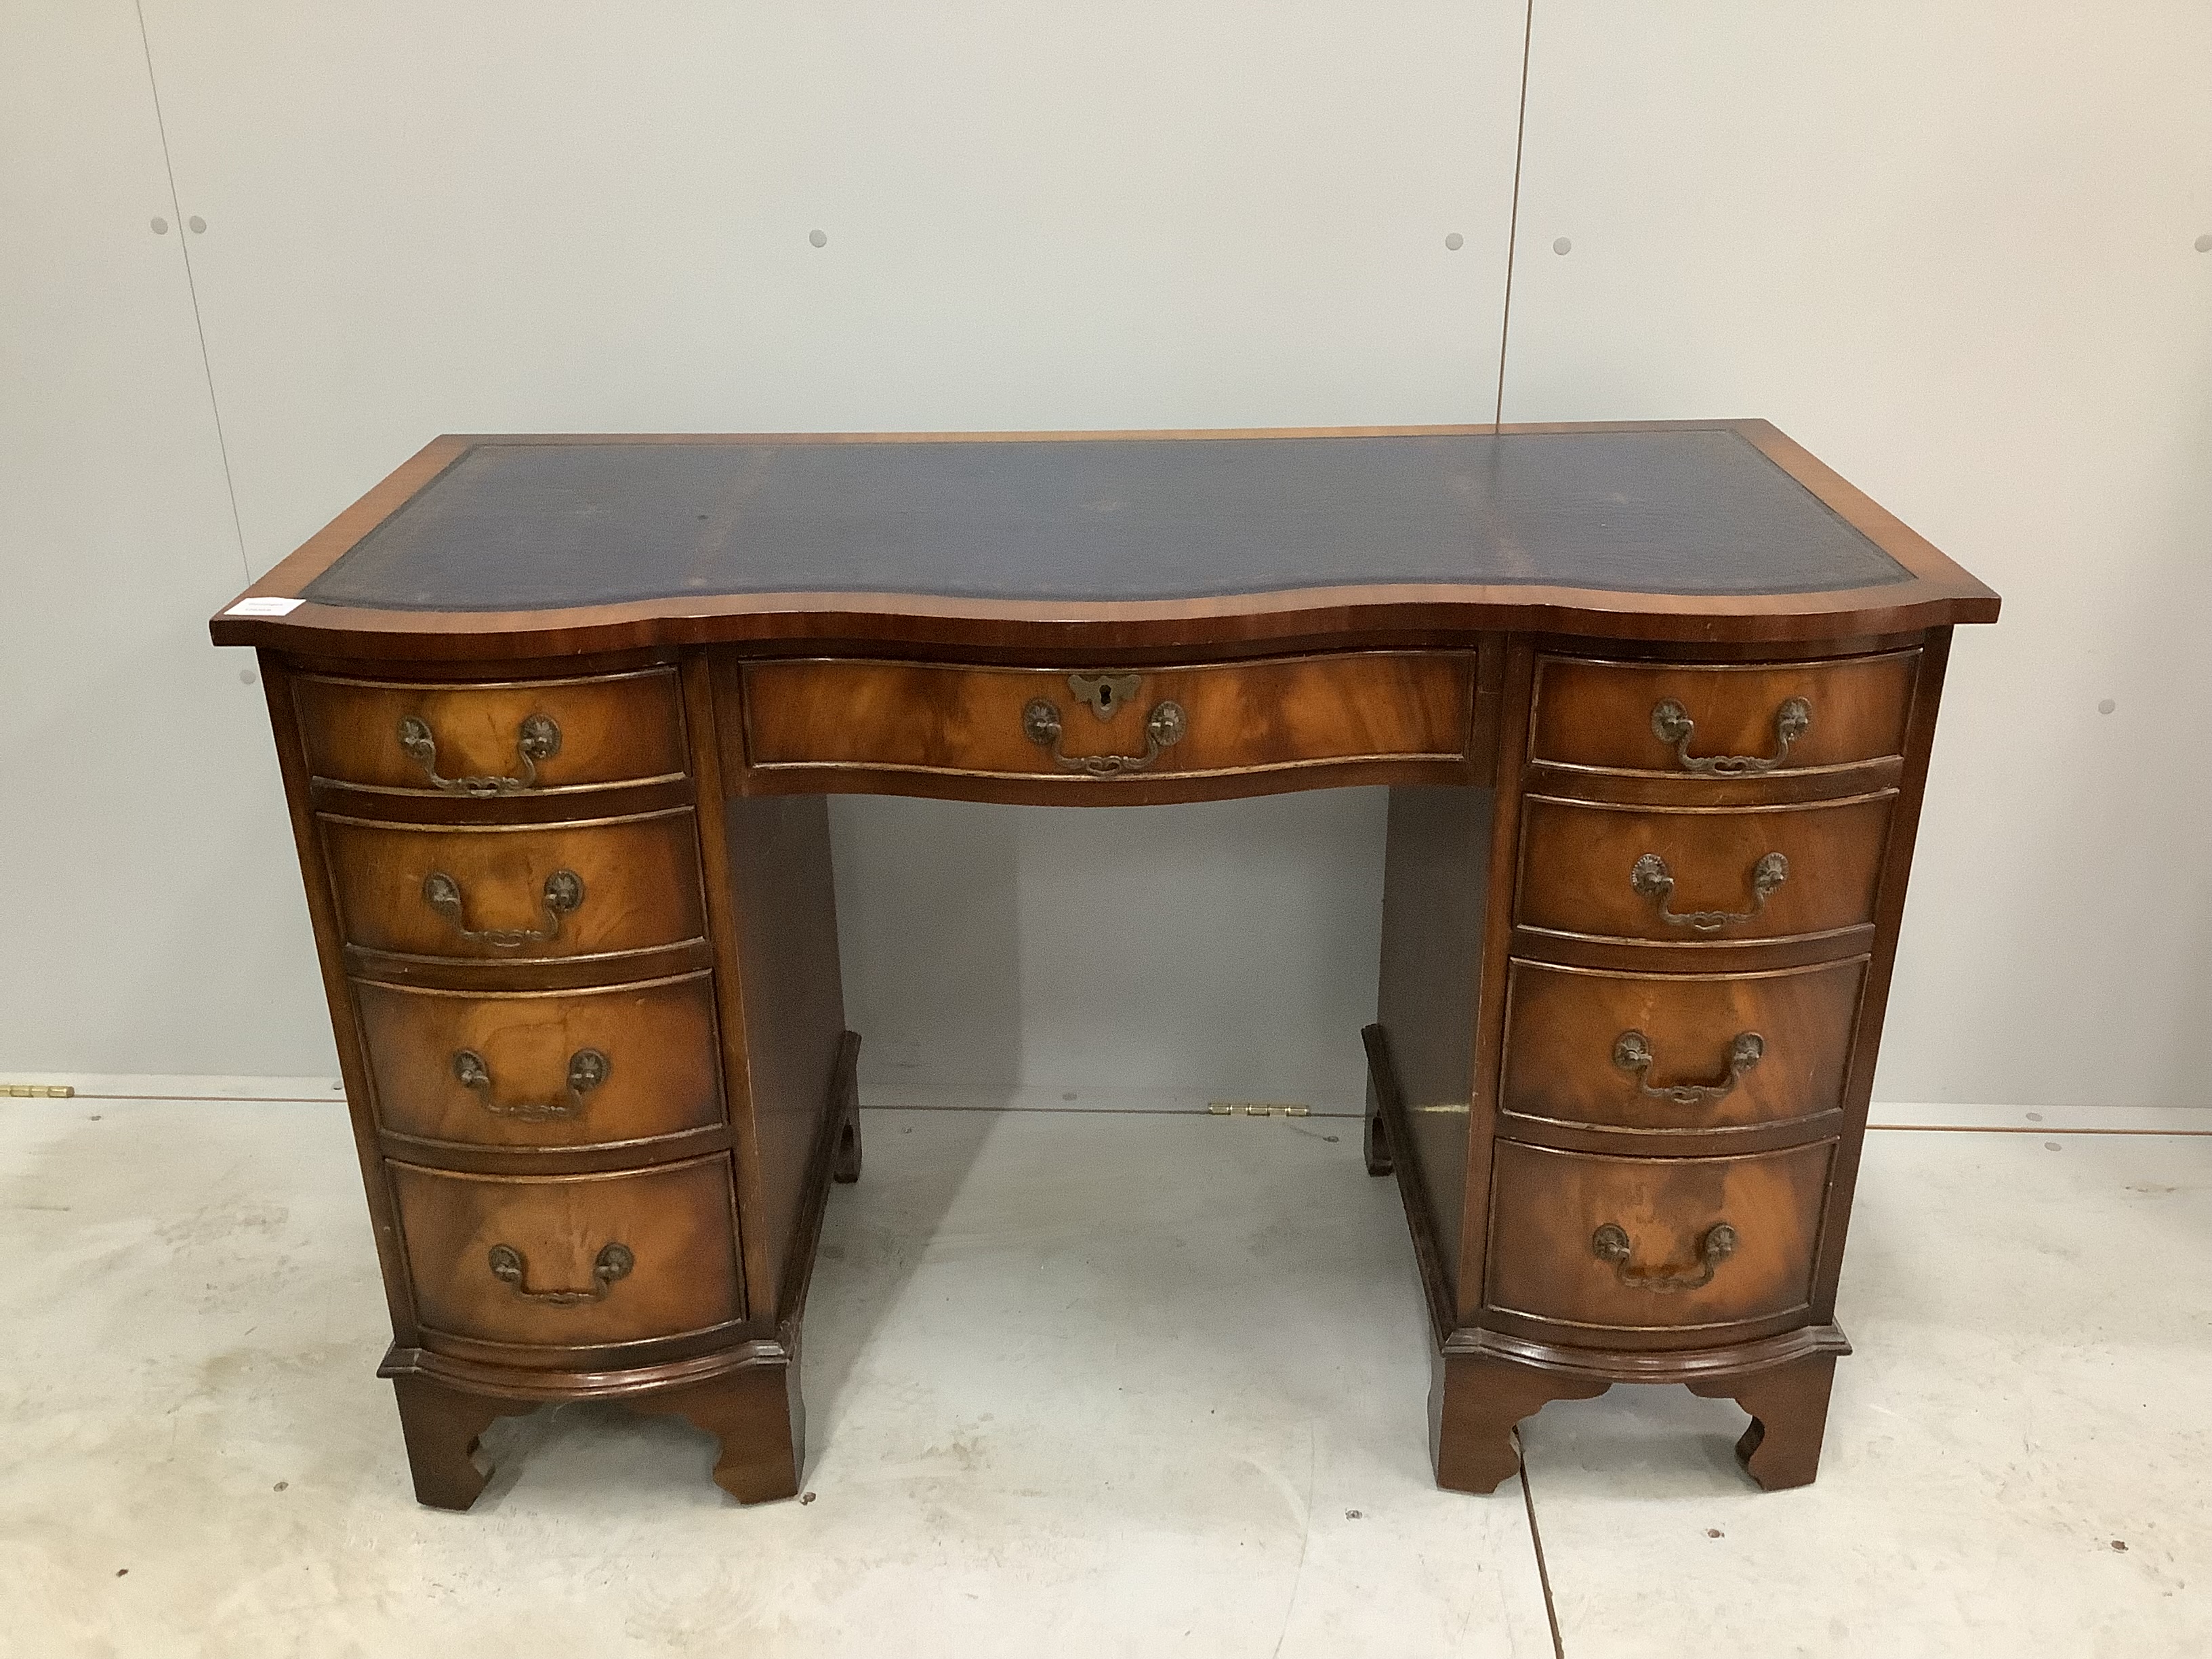 A reproduction George III style serpentine mahogany kneehole desk, width 115cm, depth 53cm height 76cm